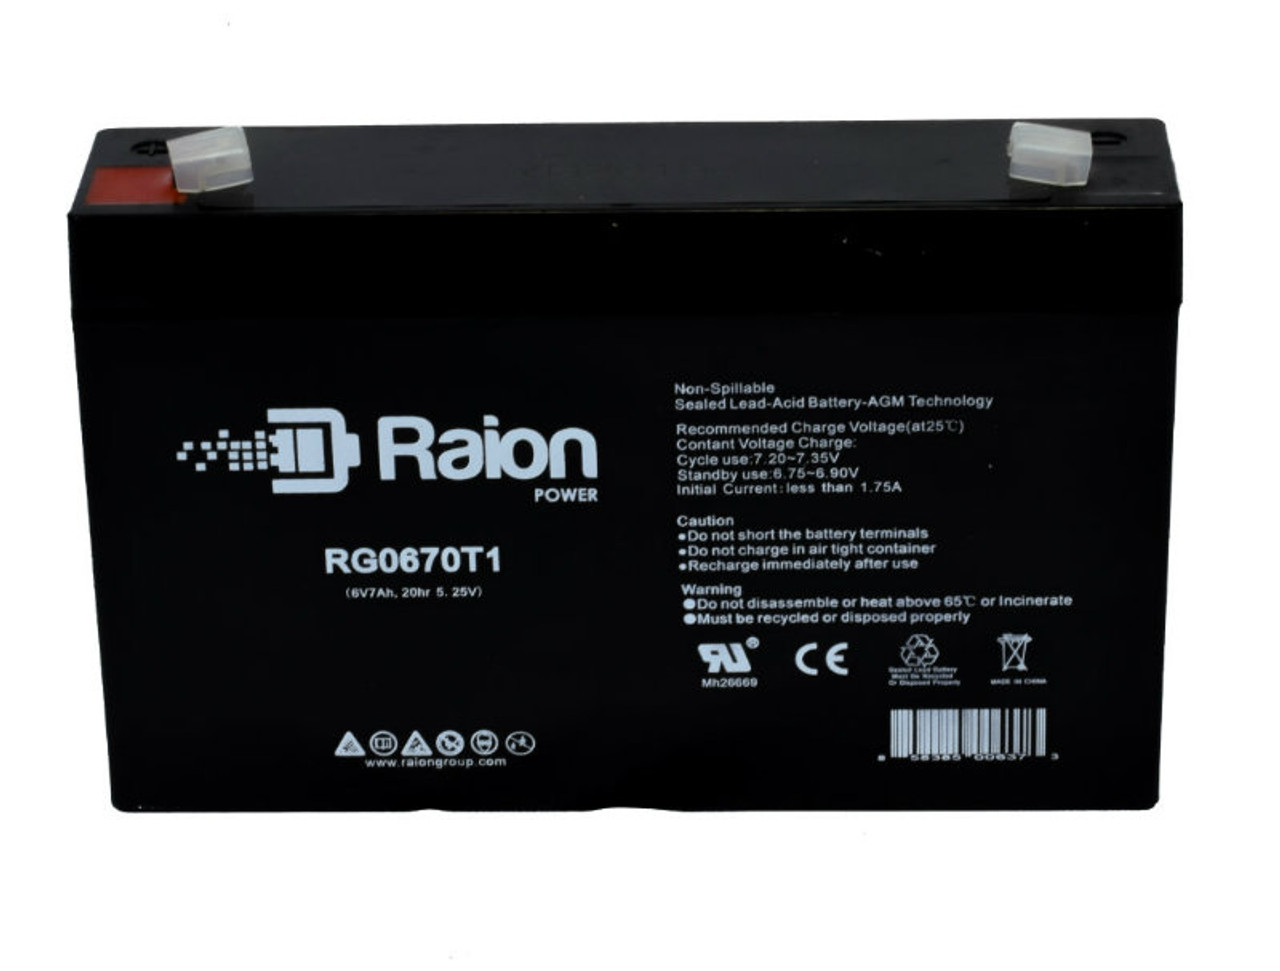 Raion Power RG0670T1 Replacement Battery Cartridge for Light Alarms ZG1